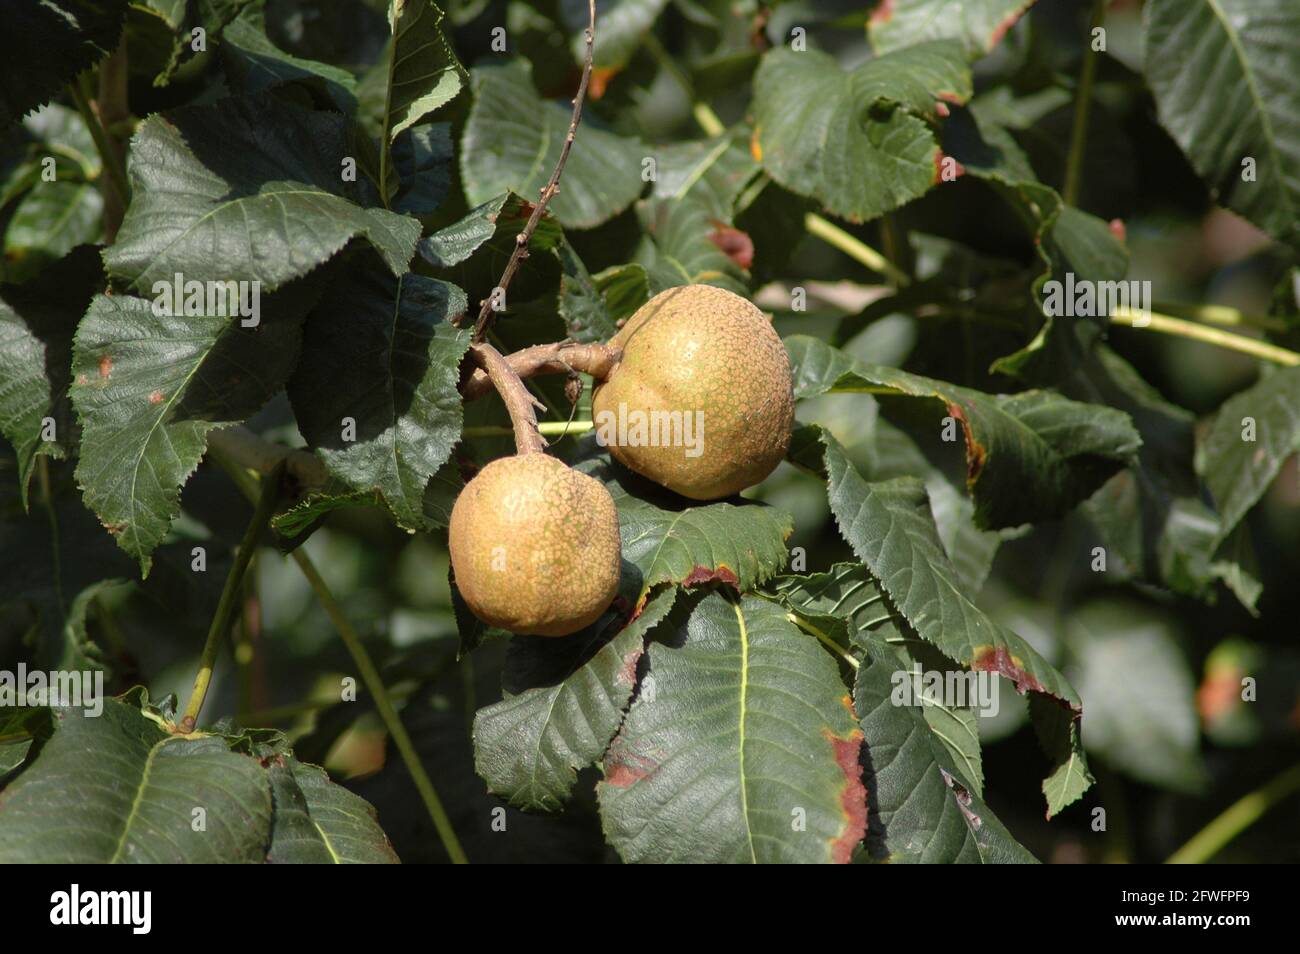 Fruit of the Red horse chestnut tree. Stock Photo